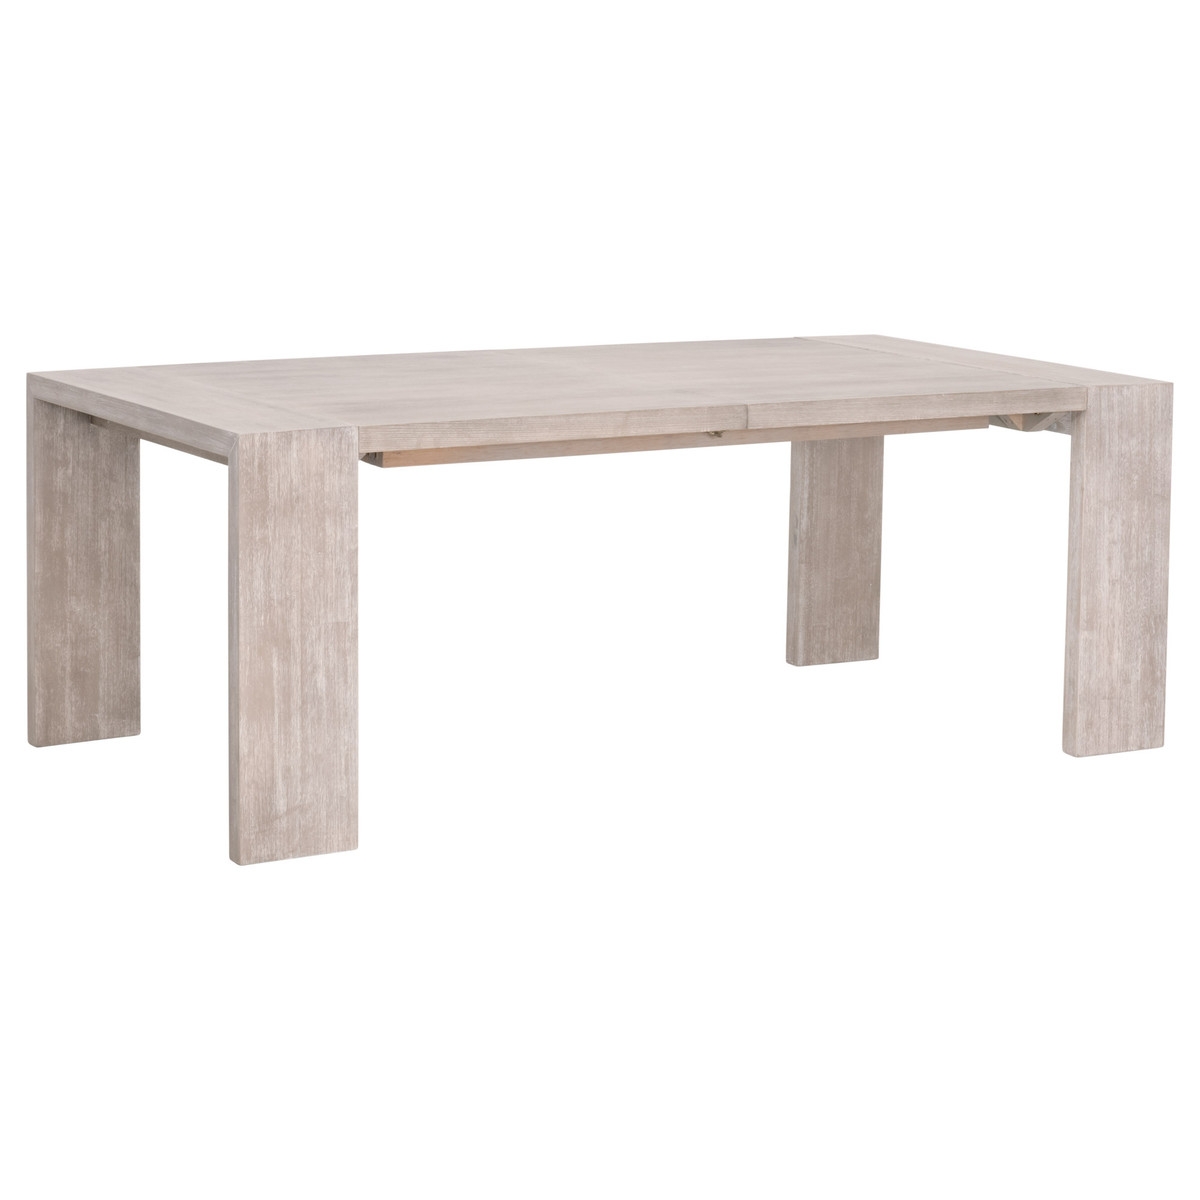 Tropea Extension Dining Table - Image 1